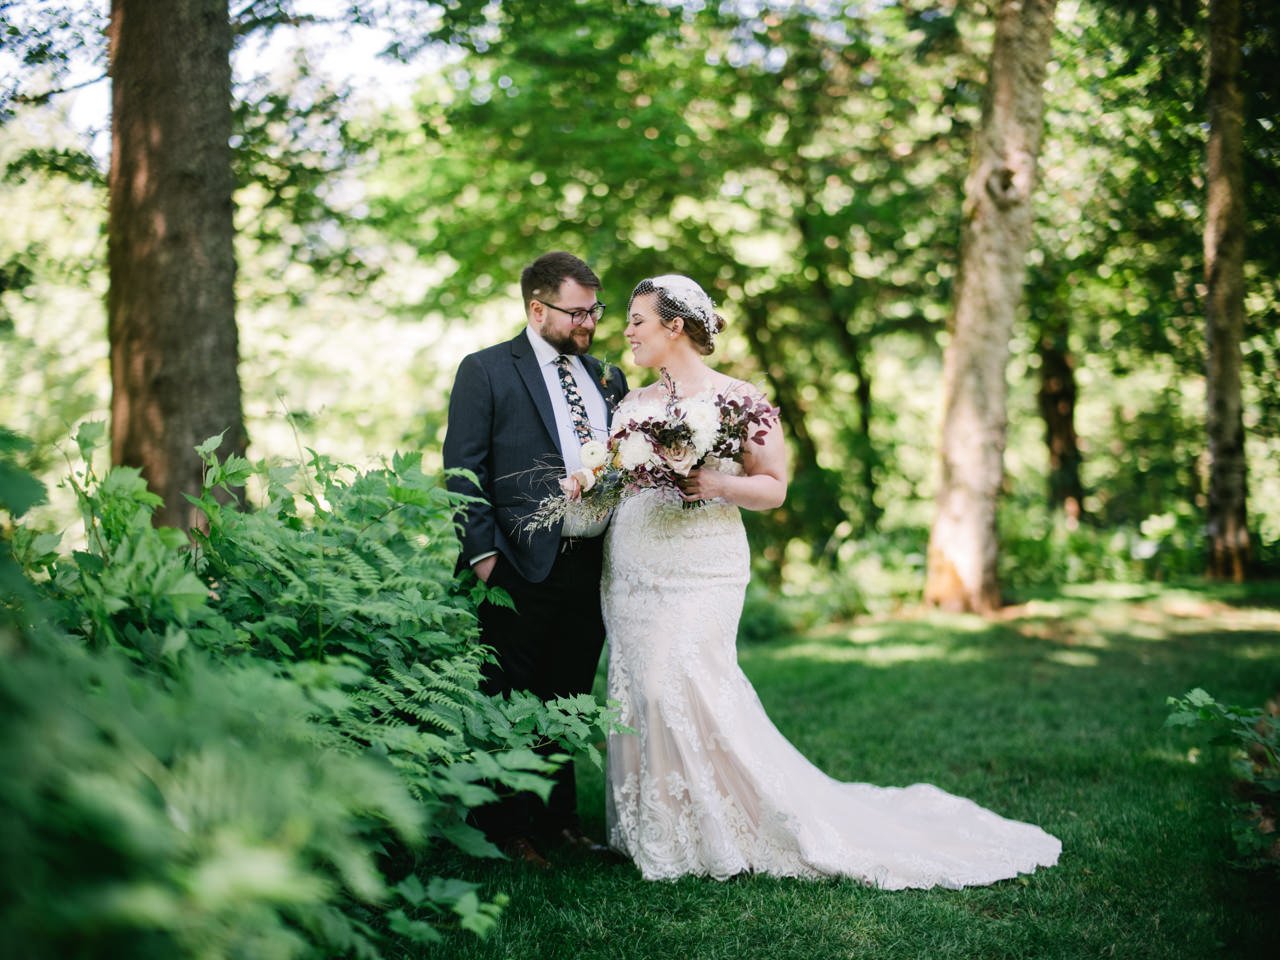  Bride and groom smile together in grassy path surrounded by ferns 